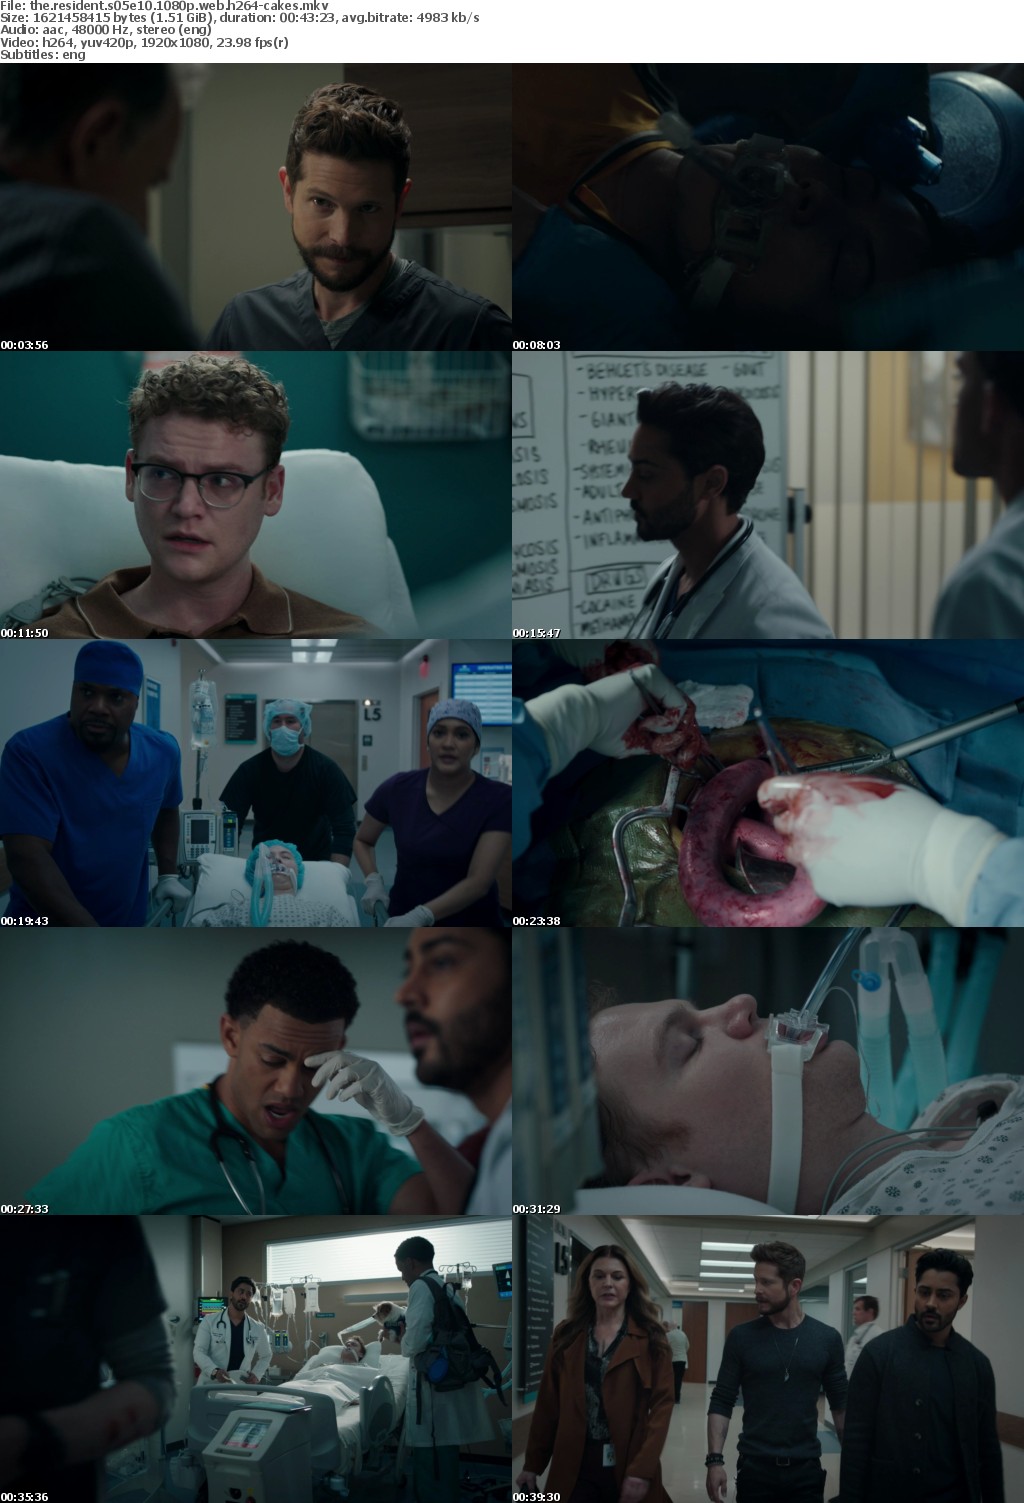 The Resident S05E10 1080p WEB H264-CAKES